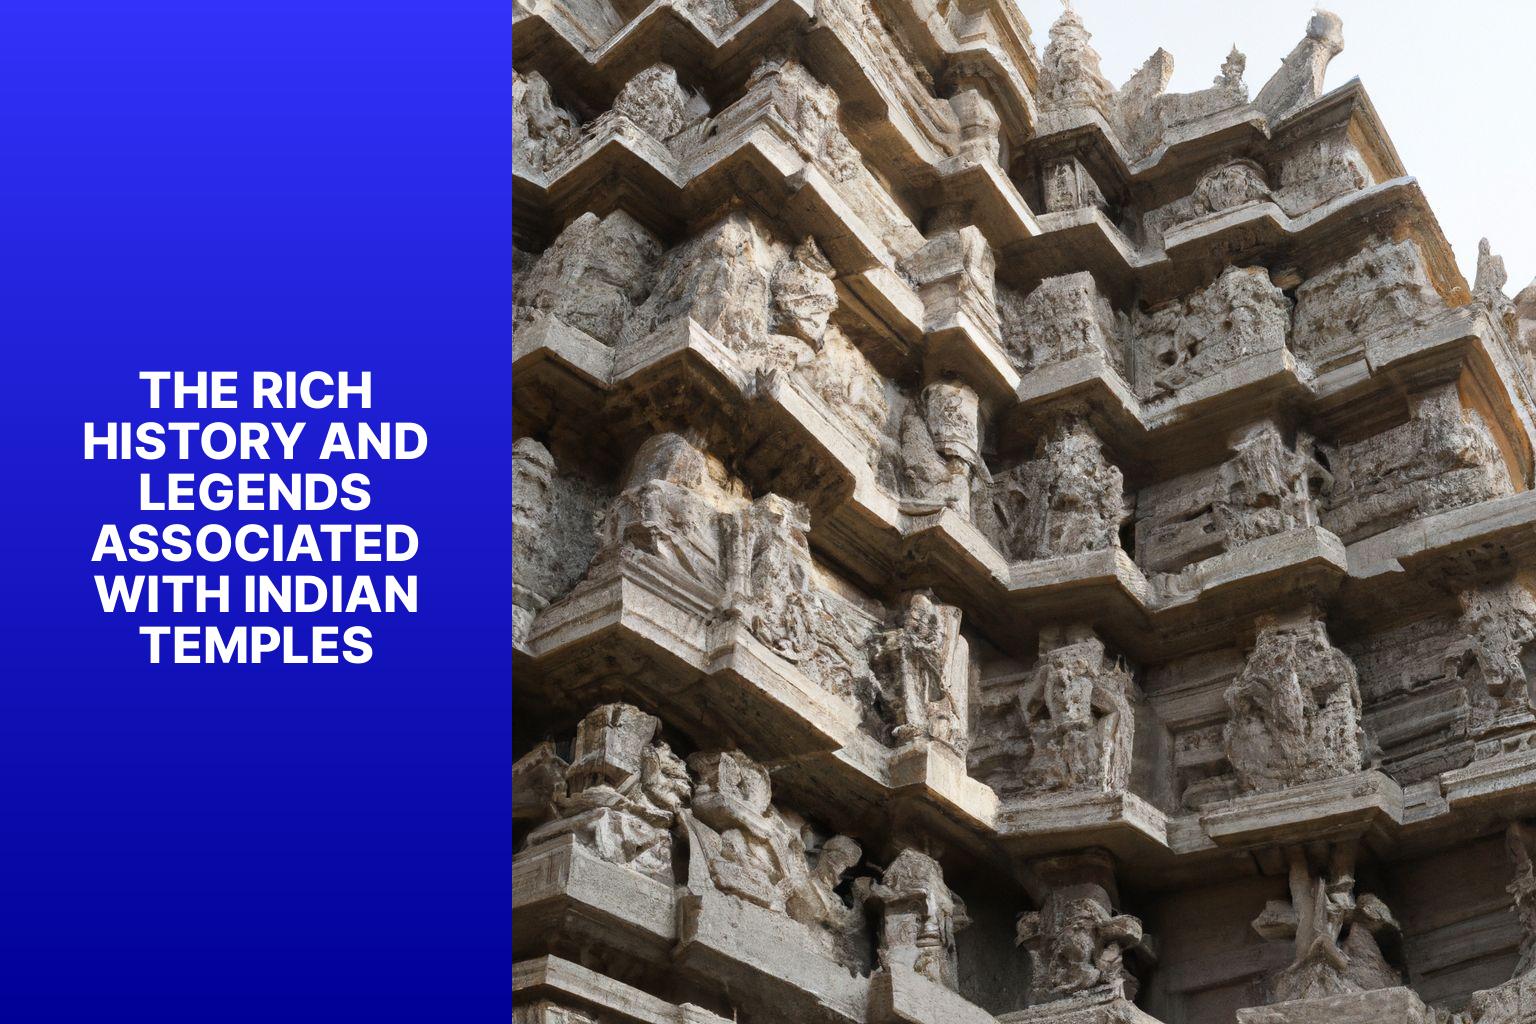 The Rich History and Legends Associated with Indian Temples - The Legacy of Temples in Indian  Beyond Religion 